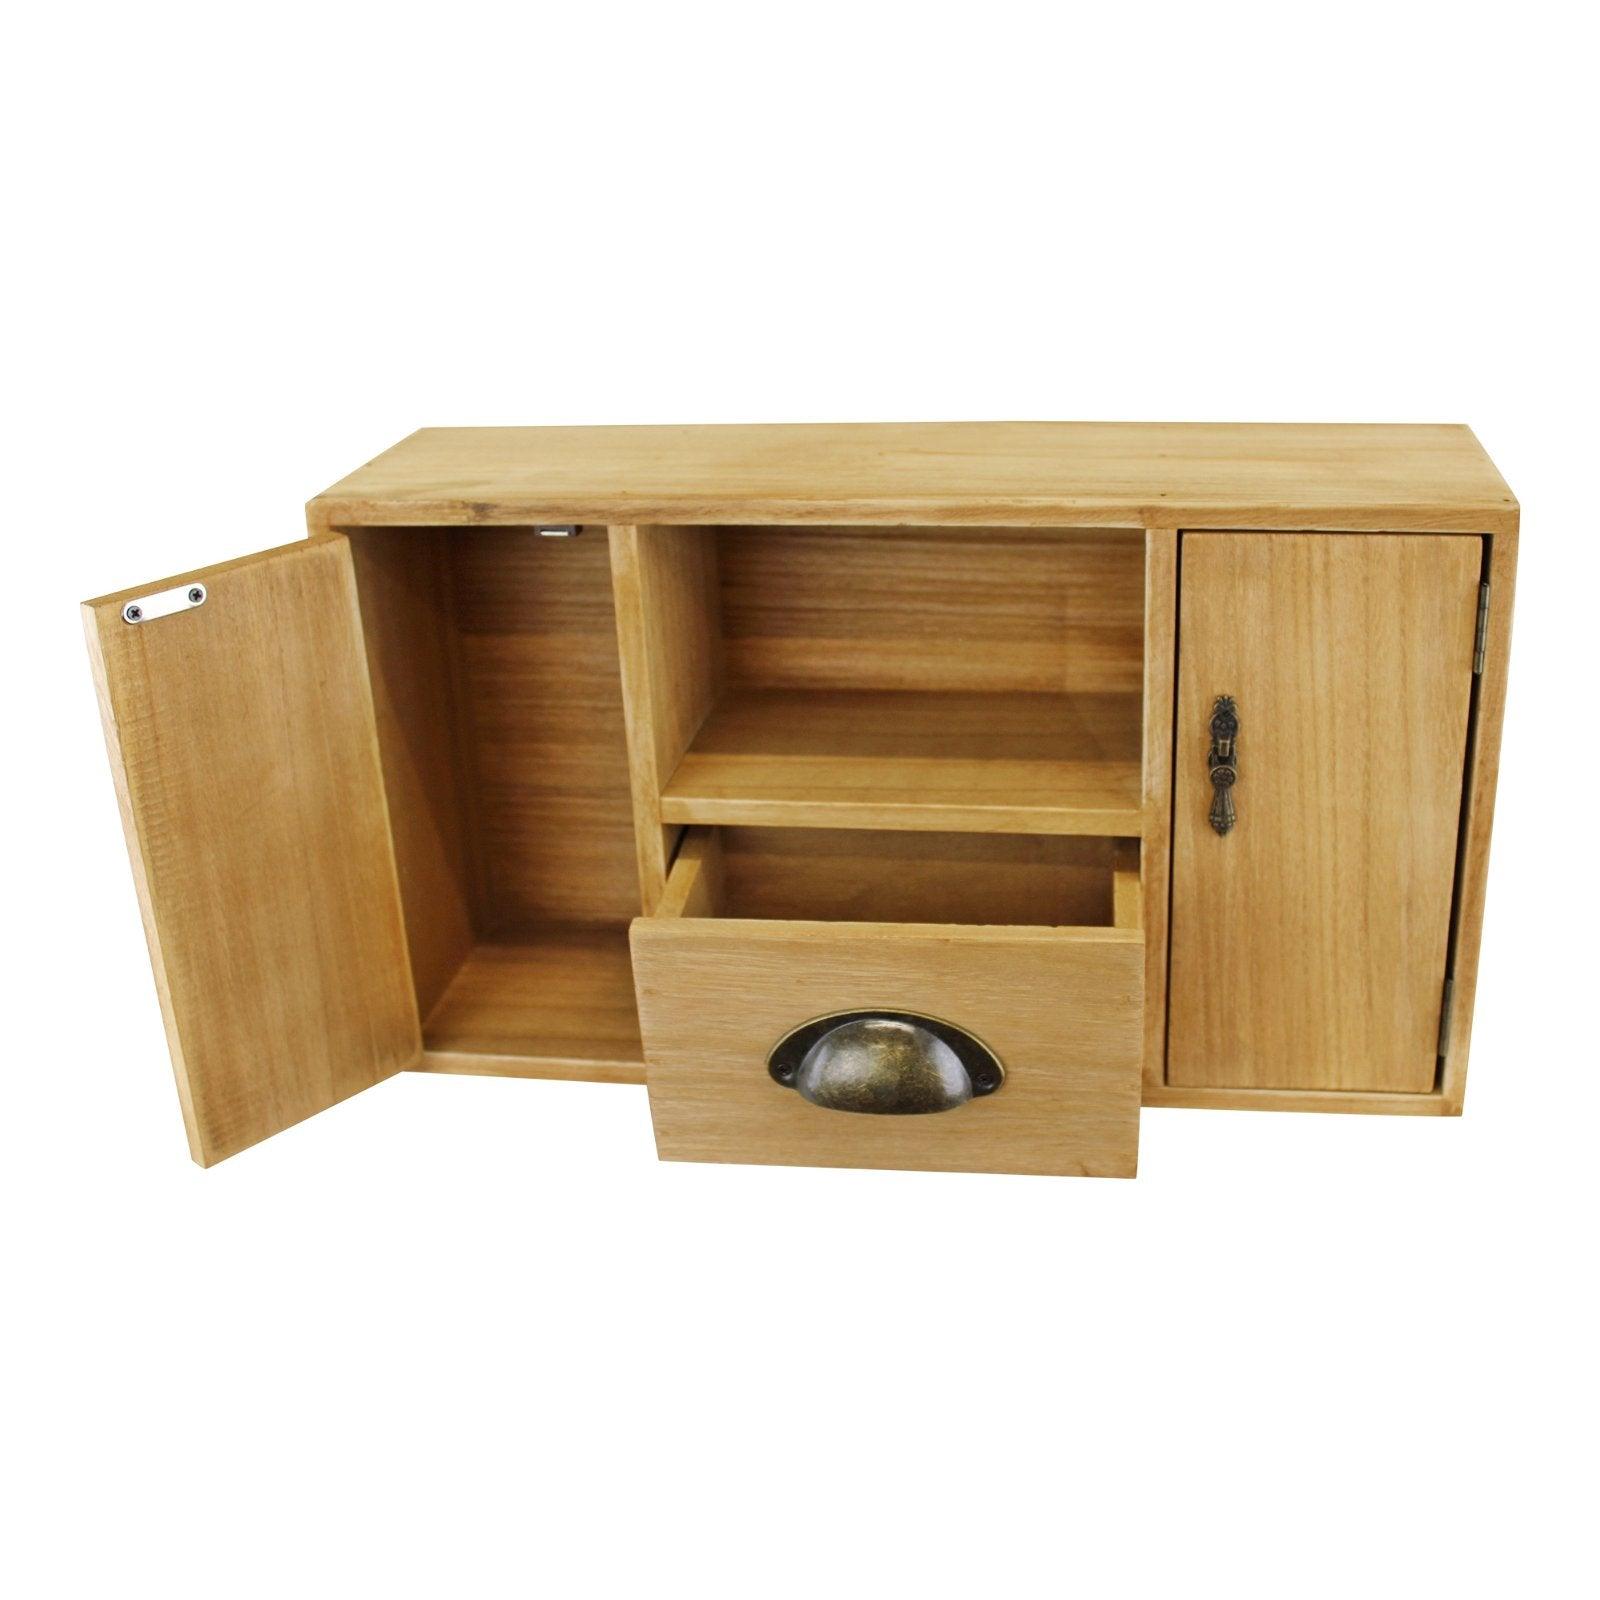 View Small Wooden Cabinet with Cupboards Drawer and Shelf information